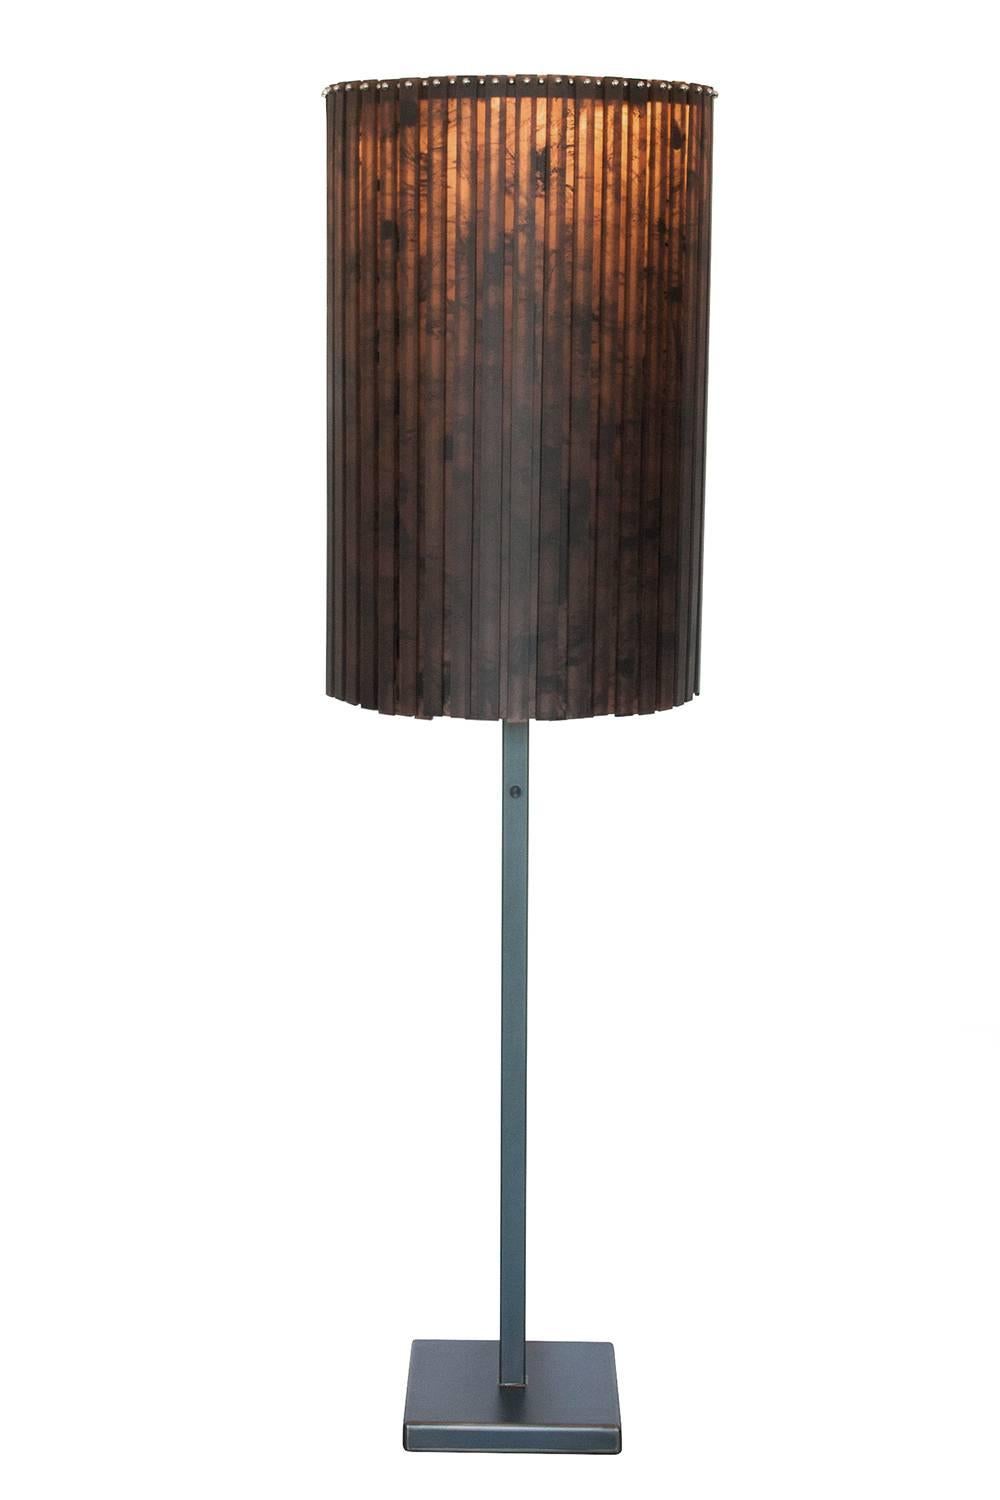 Stunning and dramatic fringe floor lamp by Martha Sturdy. Individually hand cast resin strips hung in layers from a blackened steel frame offering a soft light. Satin resin in tortoise colors of brown, black and amber. Light creates an ombre effect